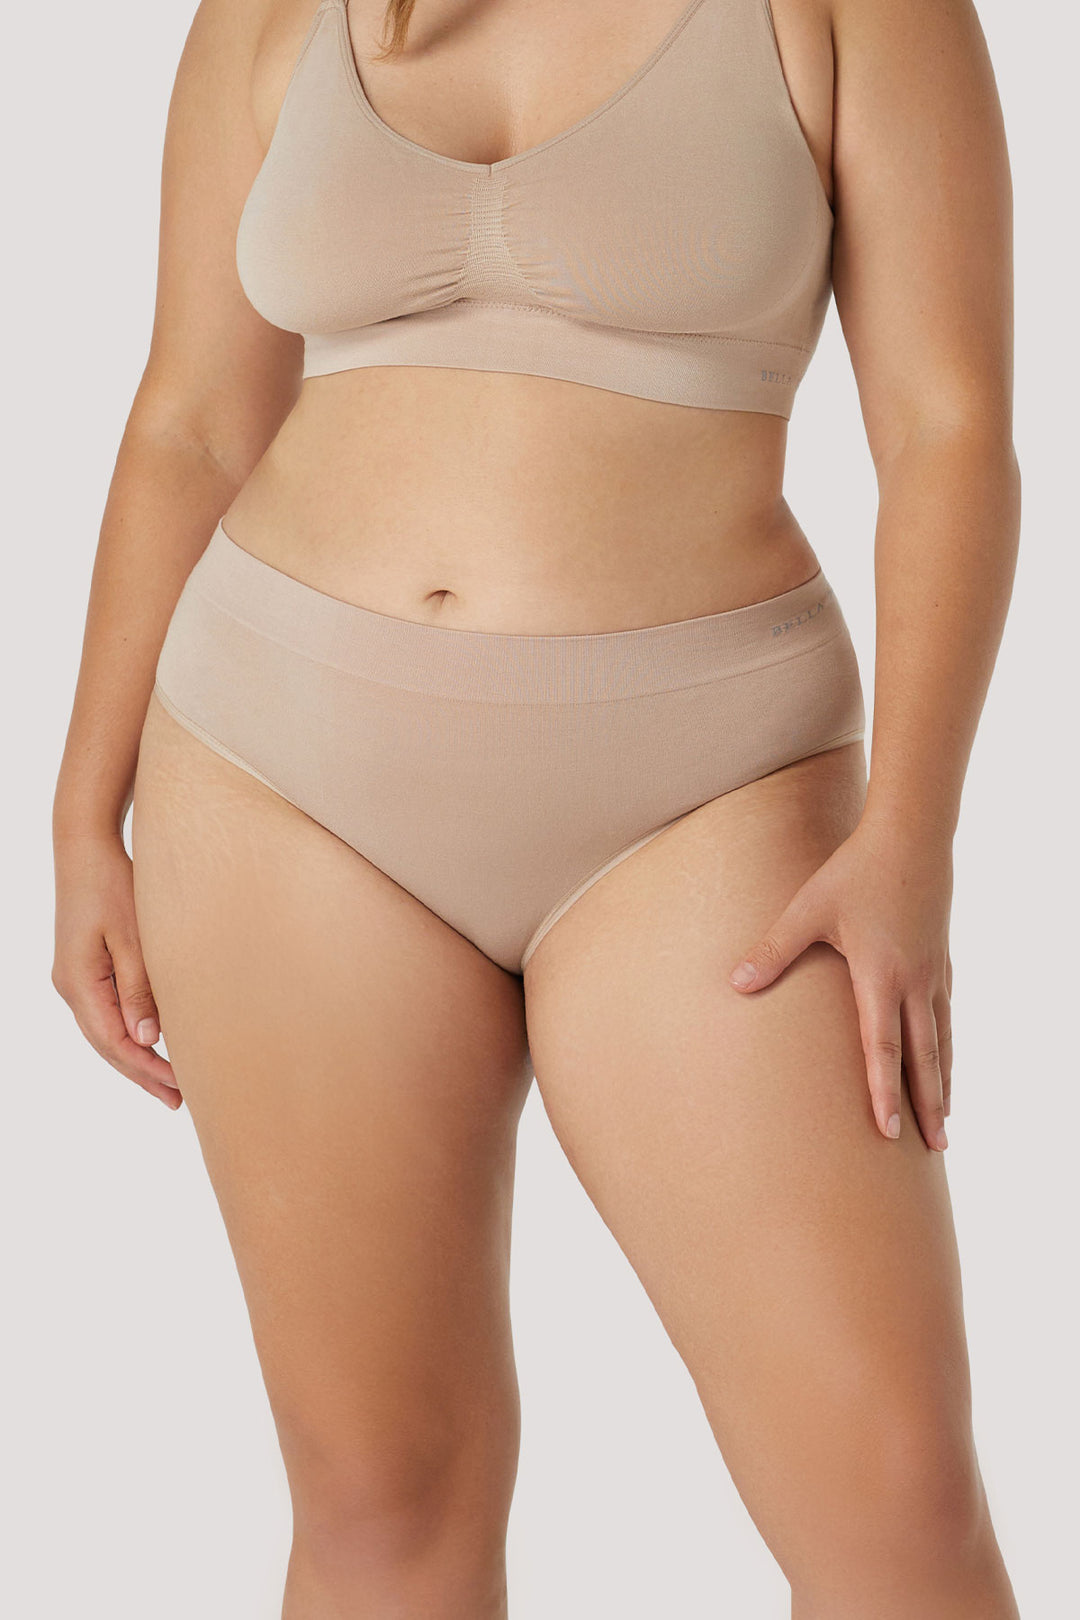 Women's comfortable & breathable underwear I Bamboo Knickers | Bella Bodies Australia I Sand | Front